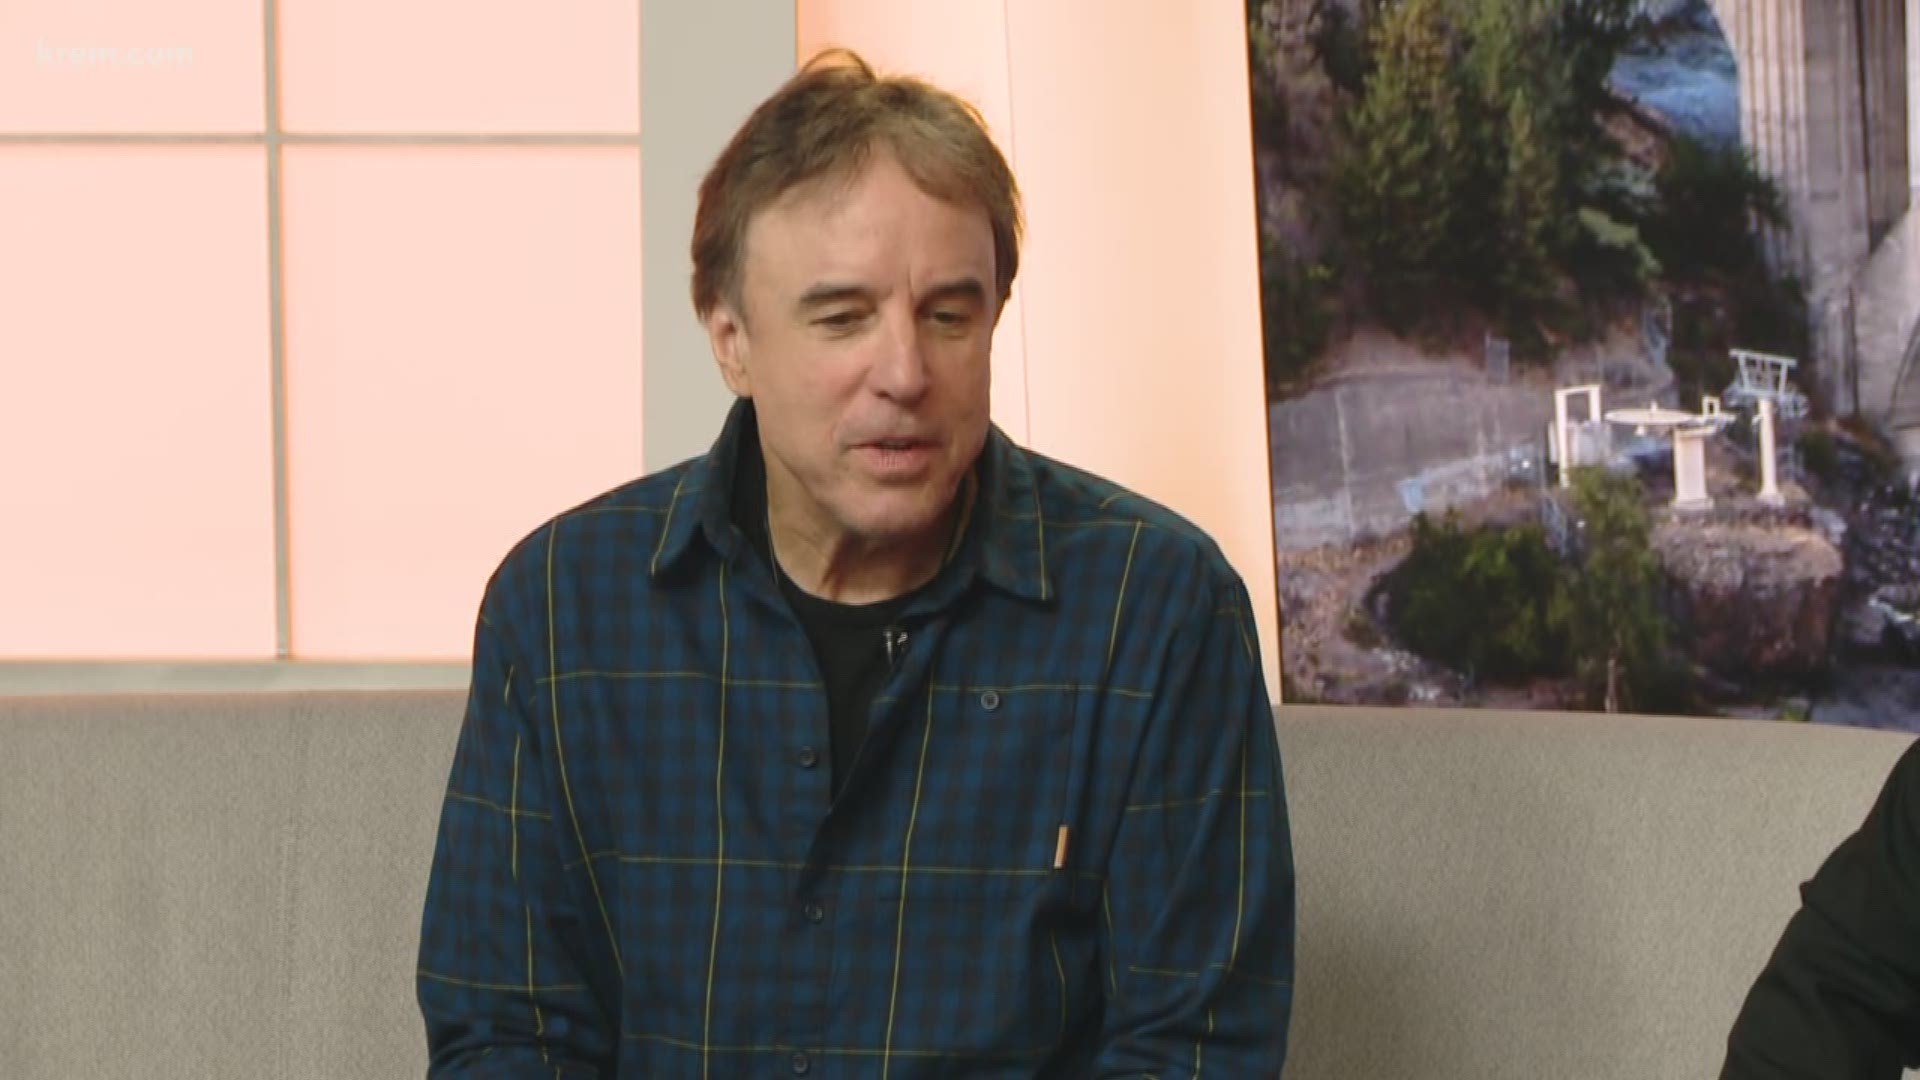 Comedian Kevin Nealon stopped by Up with KREM to chat with KREM's Evan Noorani and Danamarie McNicholl about his upcoming shows at Spokane Comedy Club.